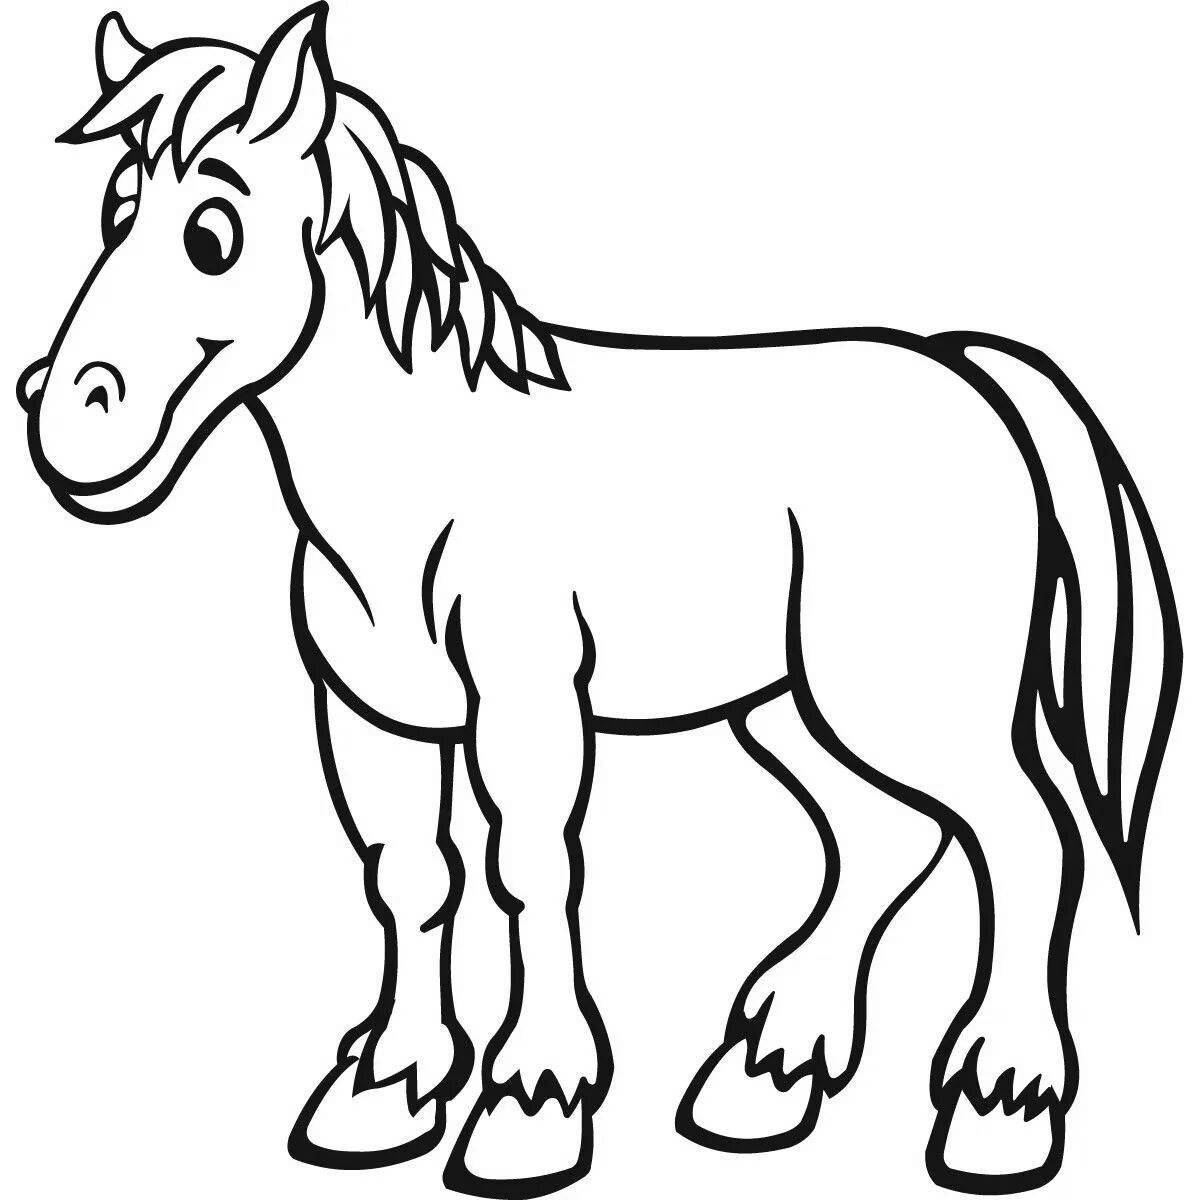 Coloring horse for 4-5 year olds